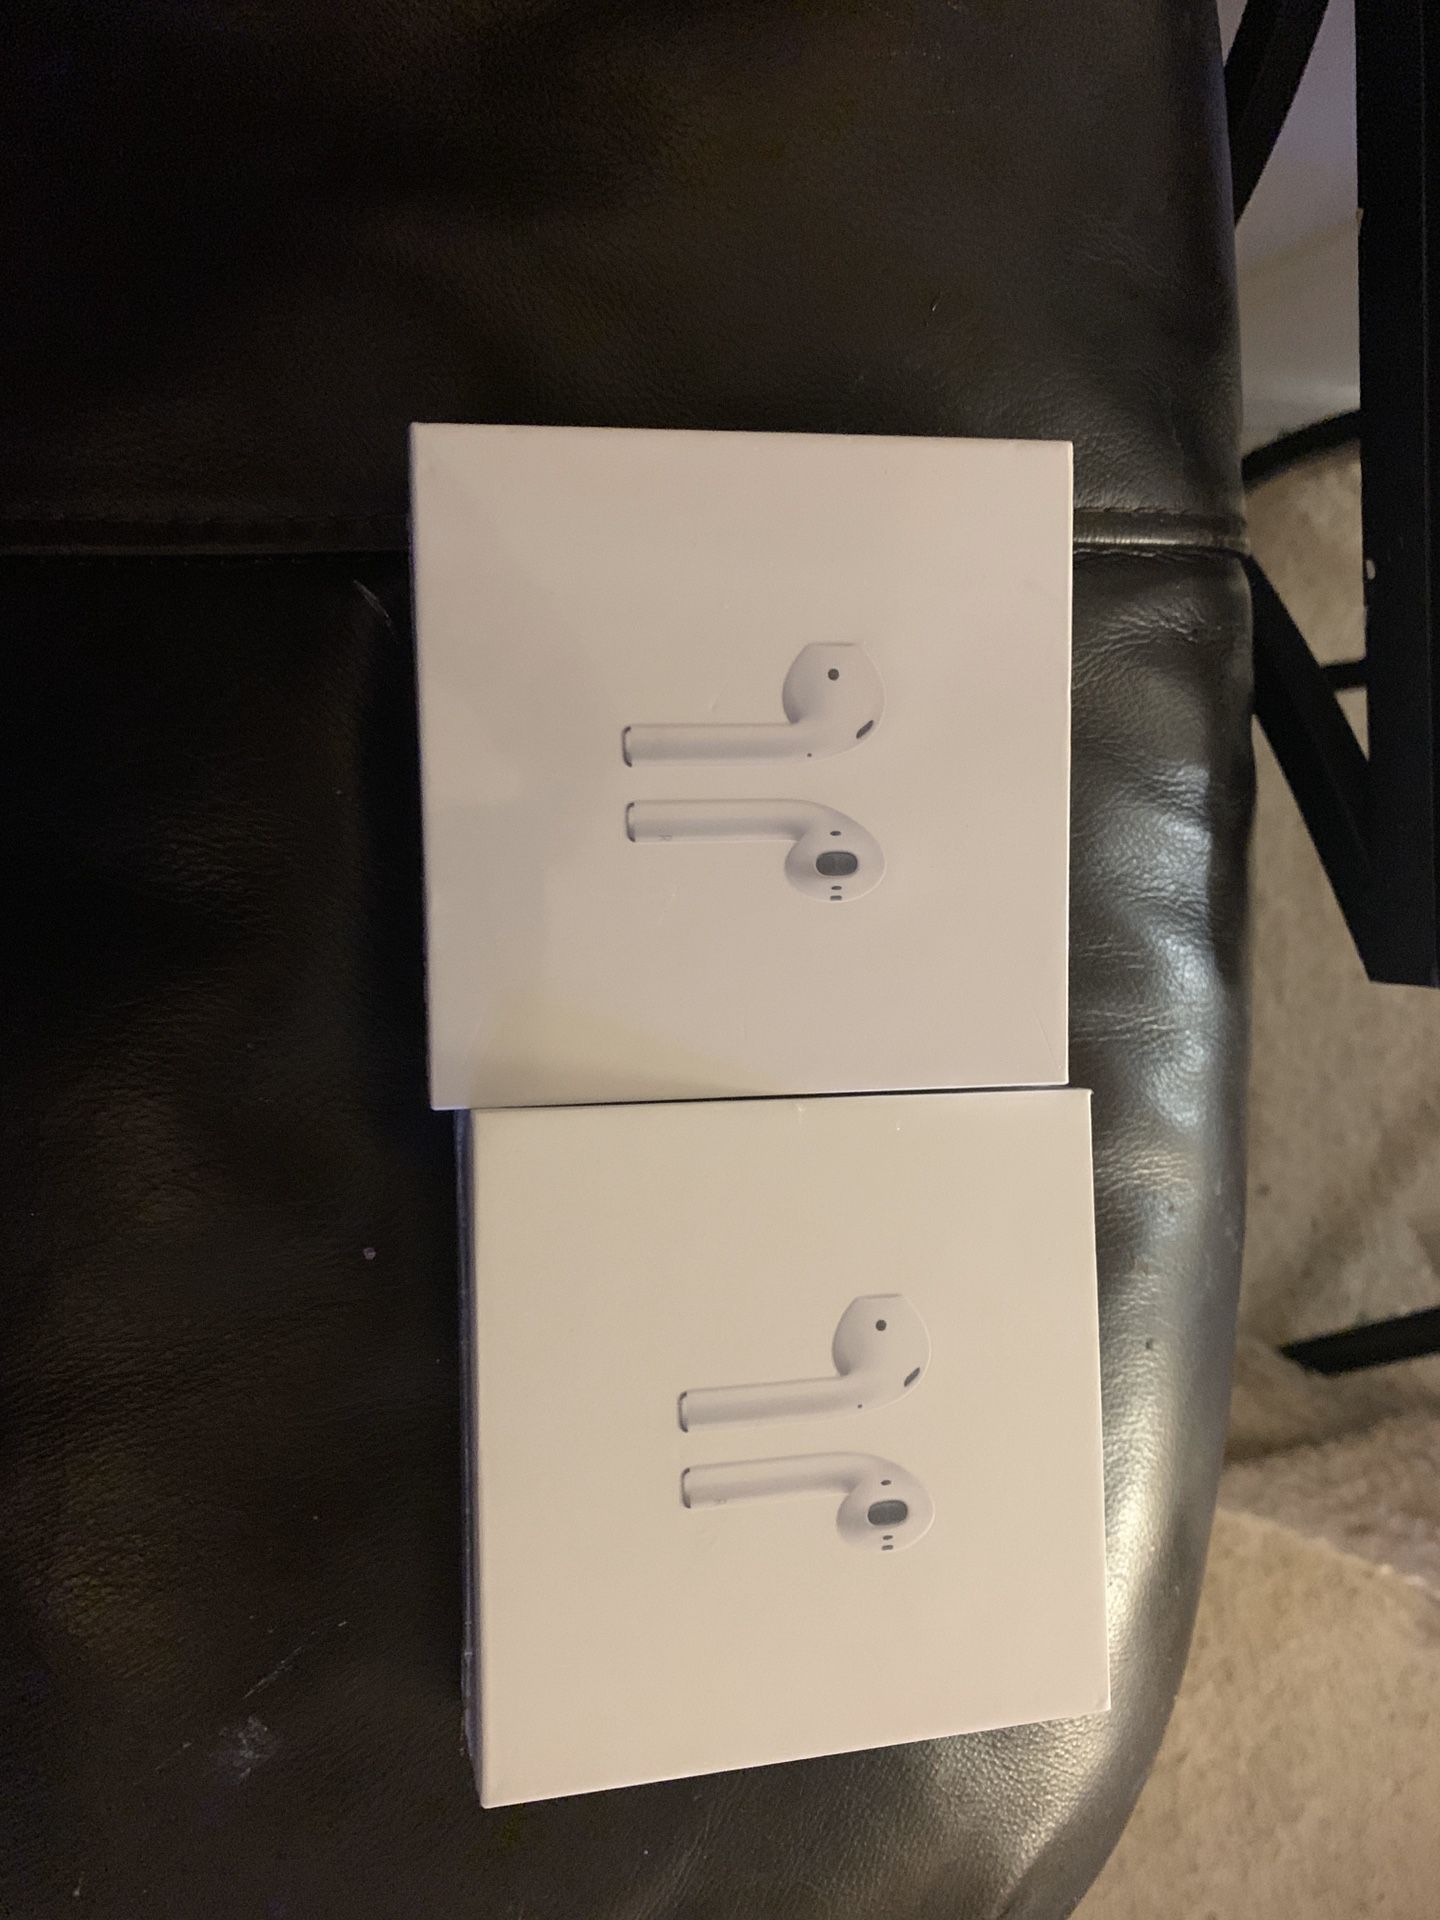 Apple Airpods second generation 135 each!